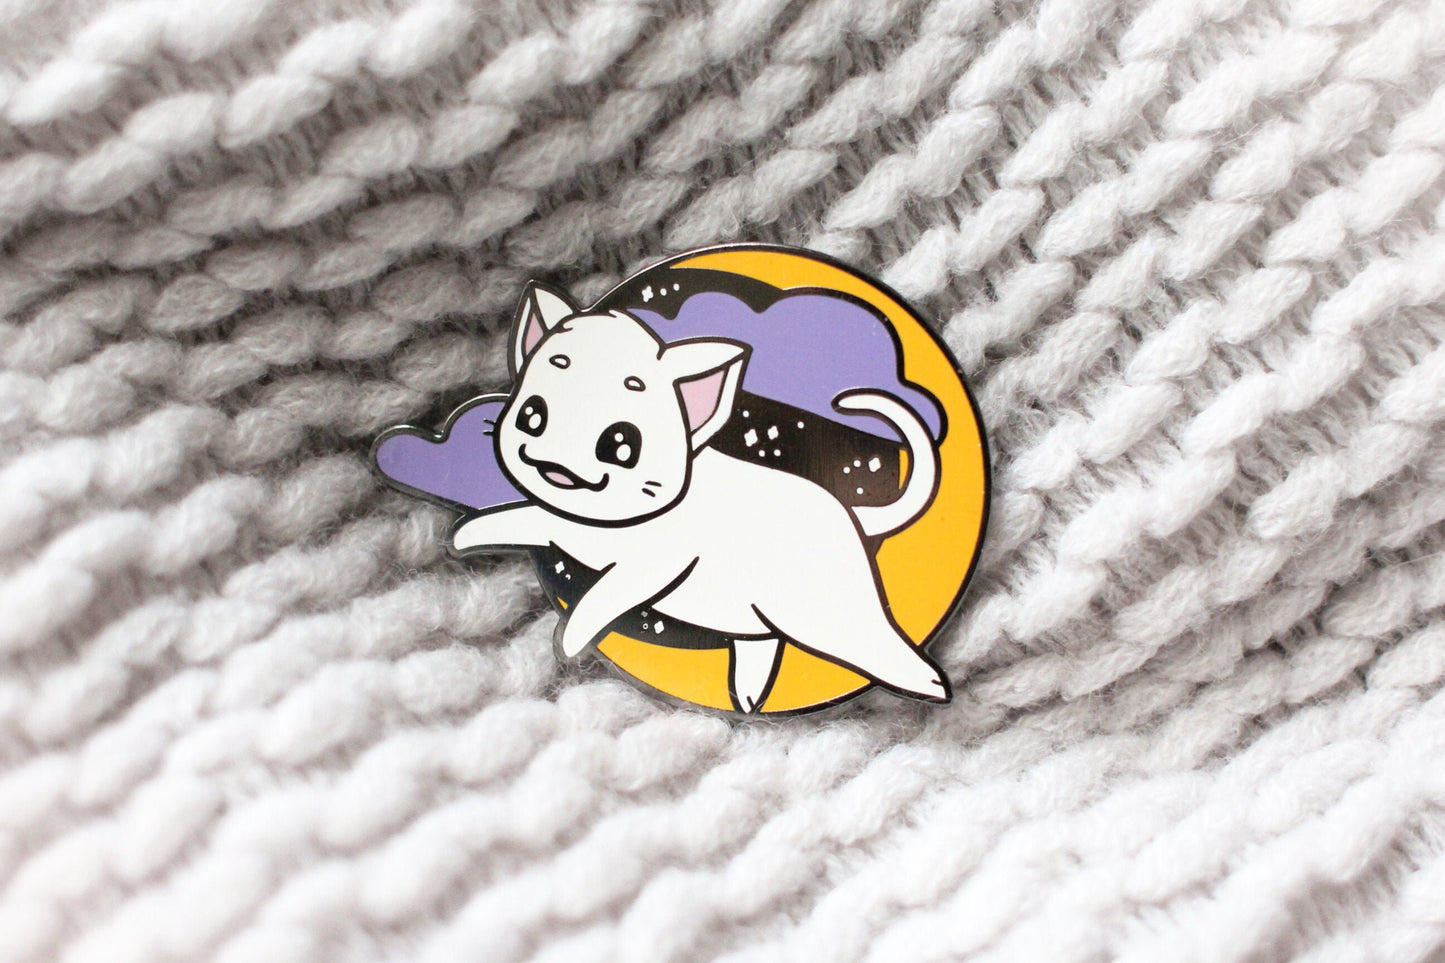 Celestial Moon Cat | Magical Collectors Hard Enamel Pin Badge | Kawaii Aesthetic Birthday Gift for Her | Christmas Present for Him | Miamouz